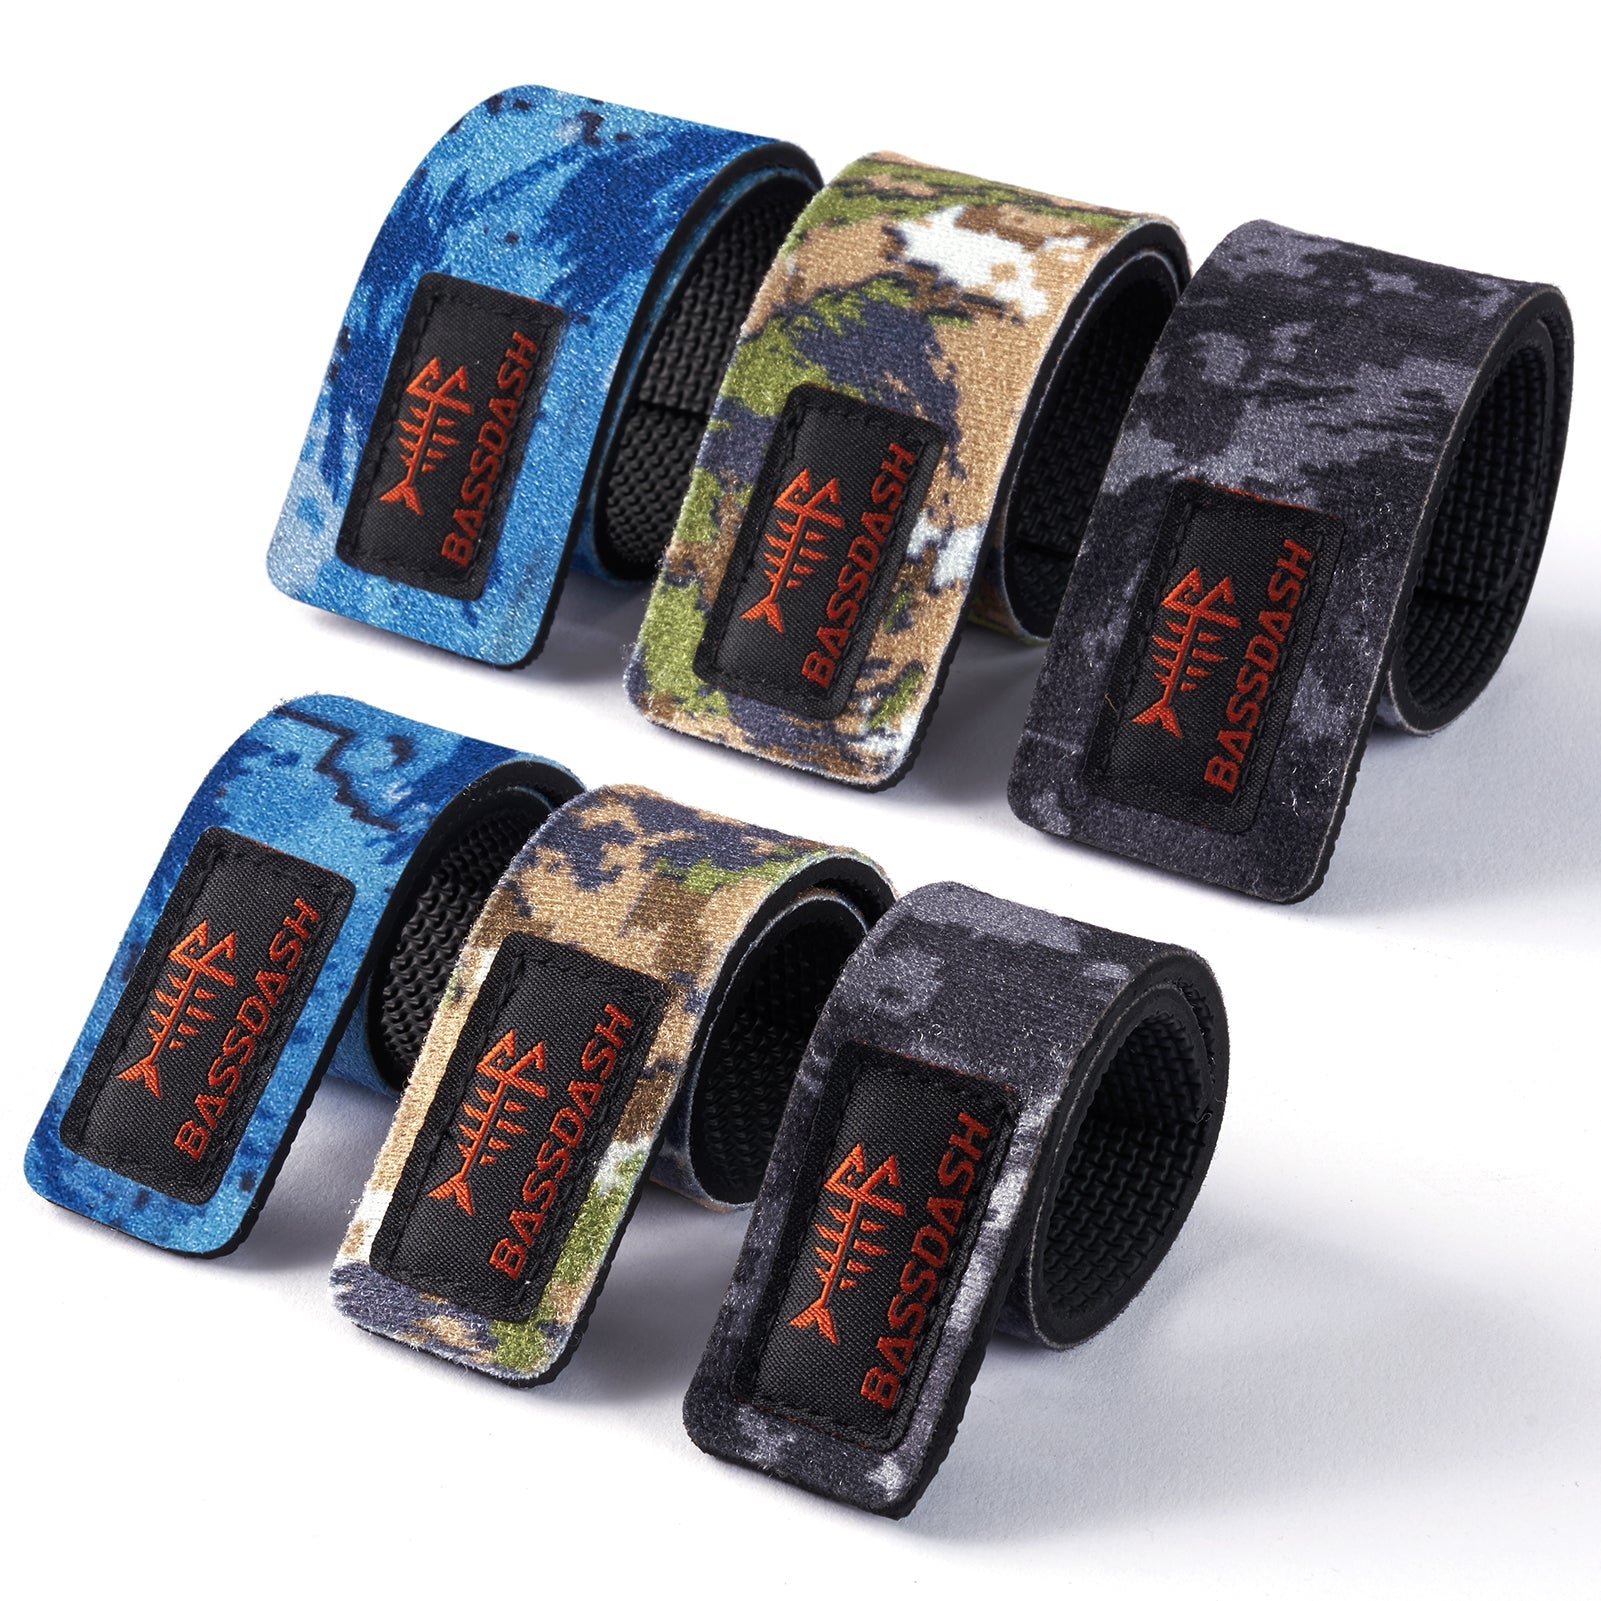 Fishing Rod Straps 6-Pack - 6-Pack in Three Camo Colors (OHN)